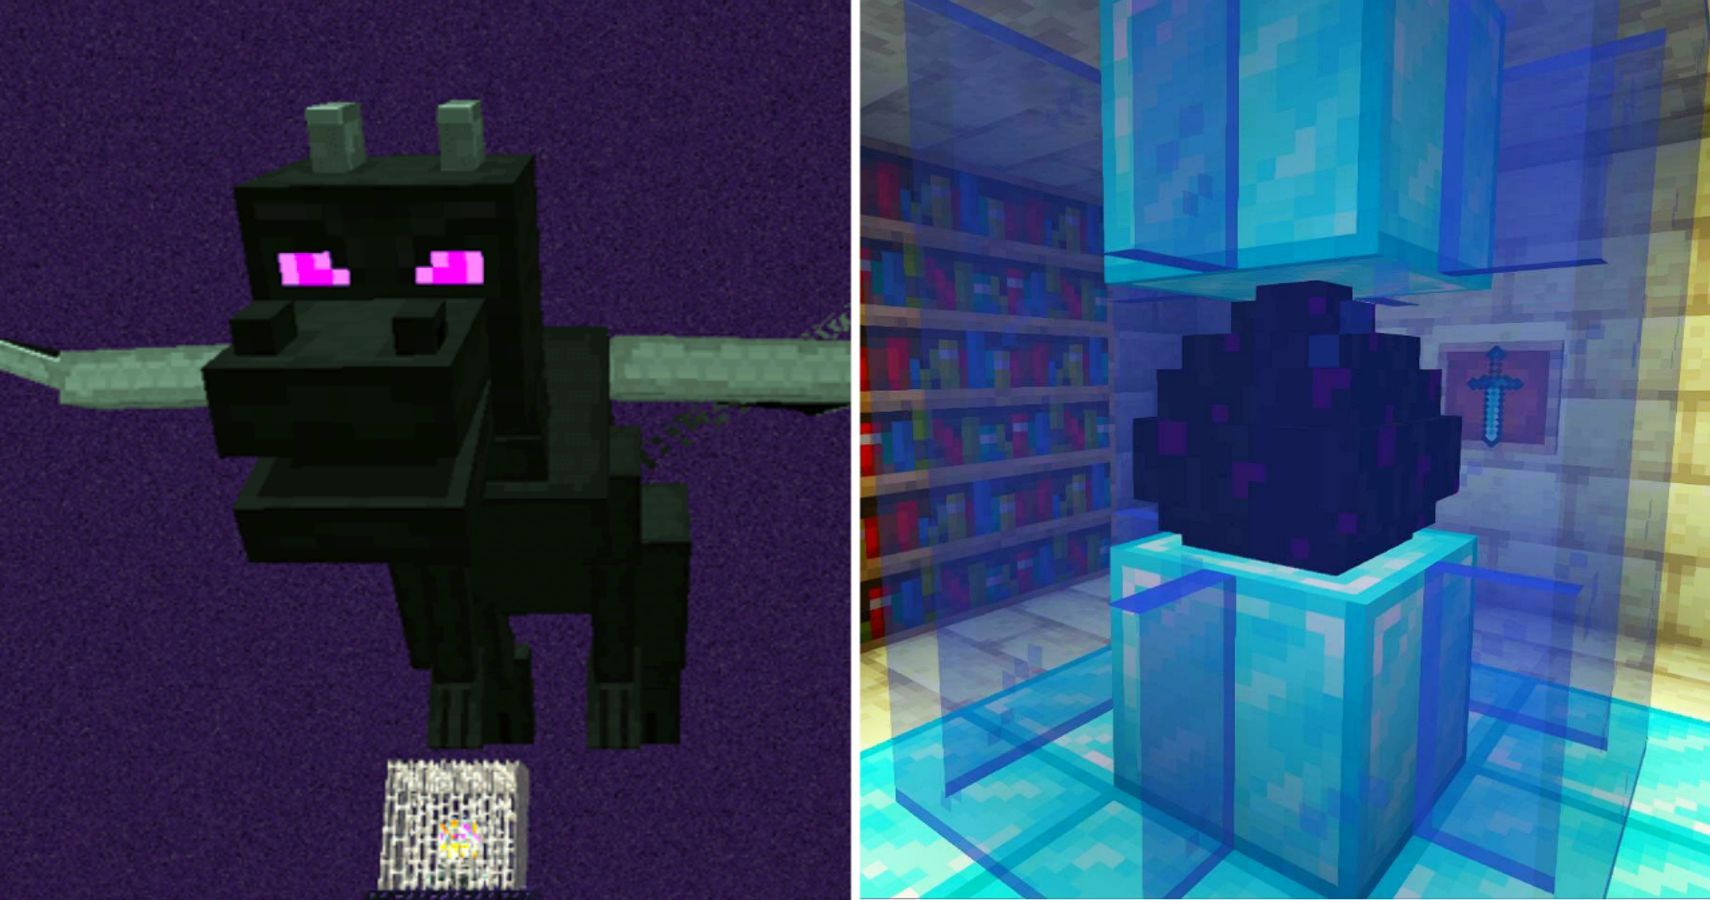 How to Find the Ender Dragon in Minecraft: Best Method